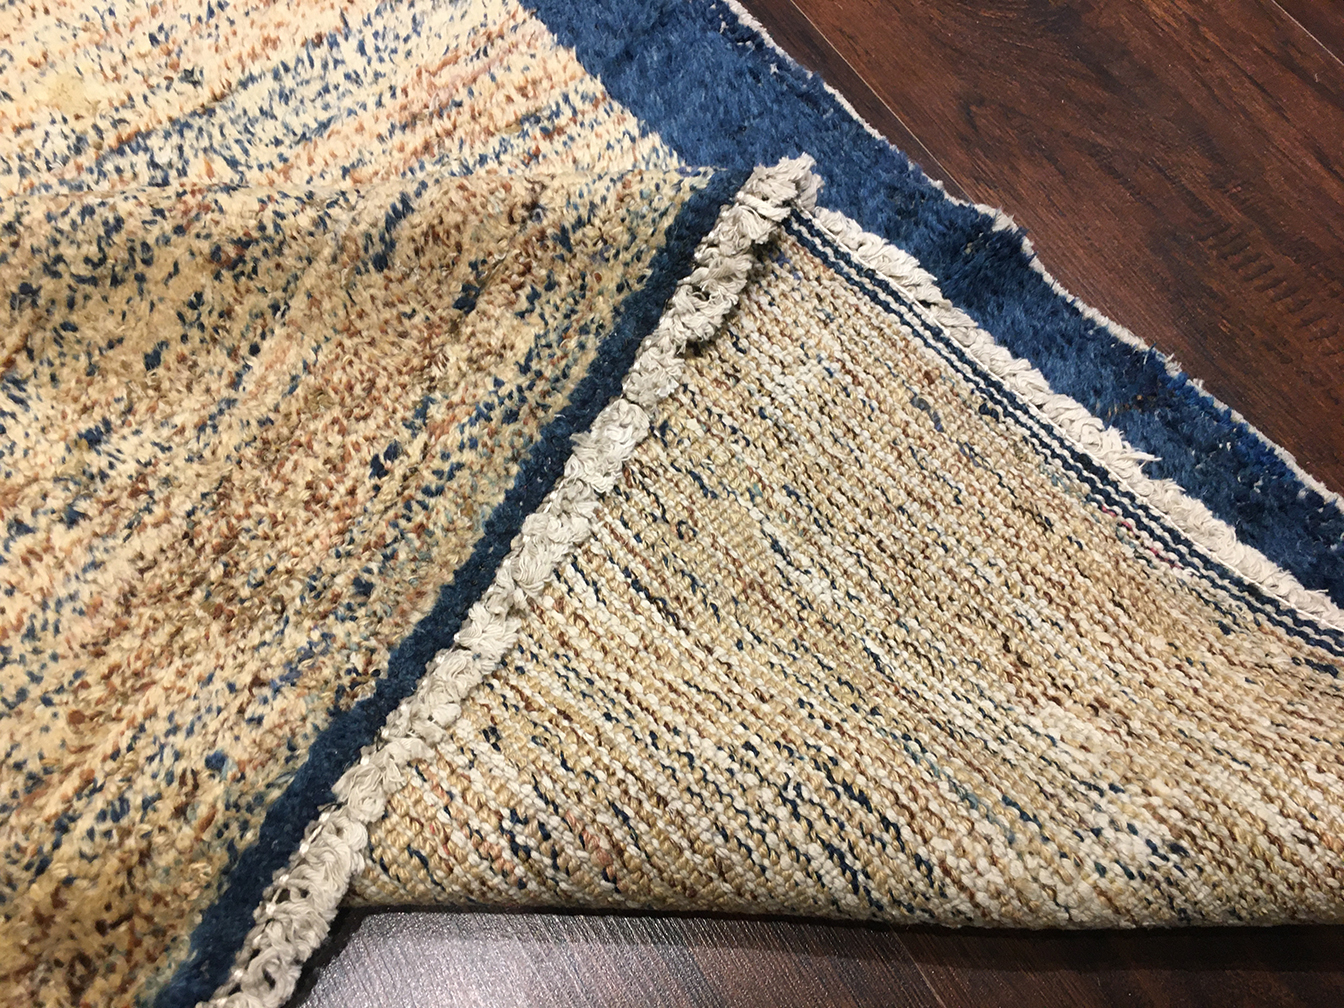 Antique chinese Rug - # 55647